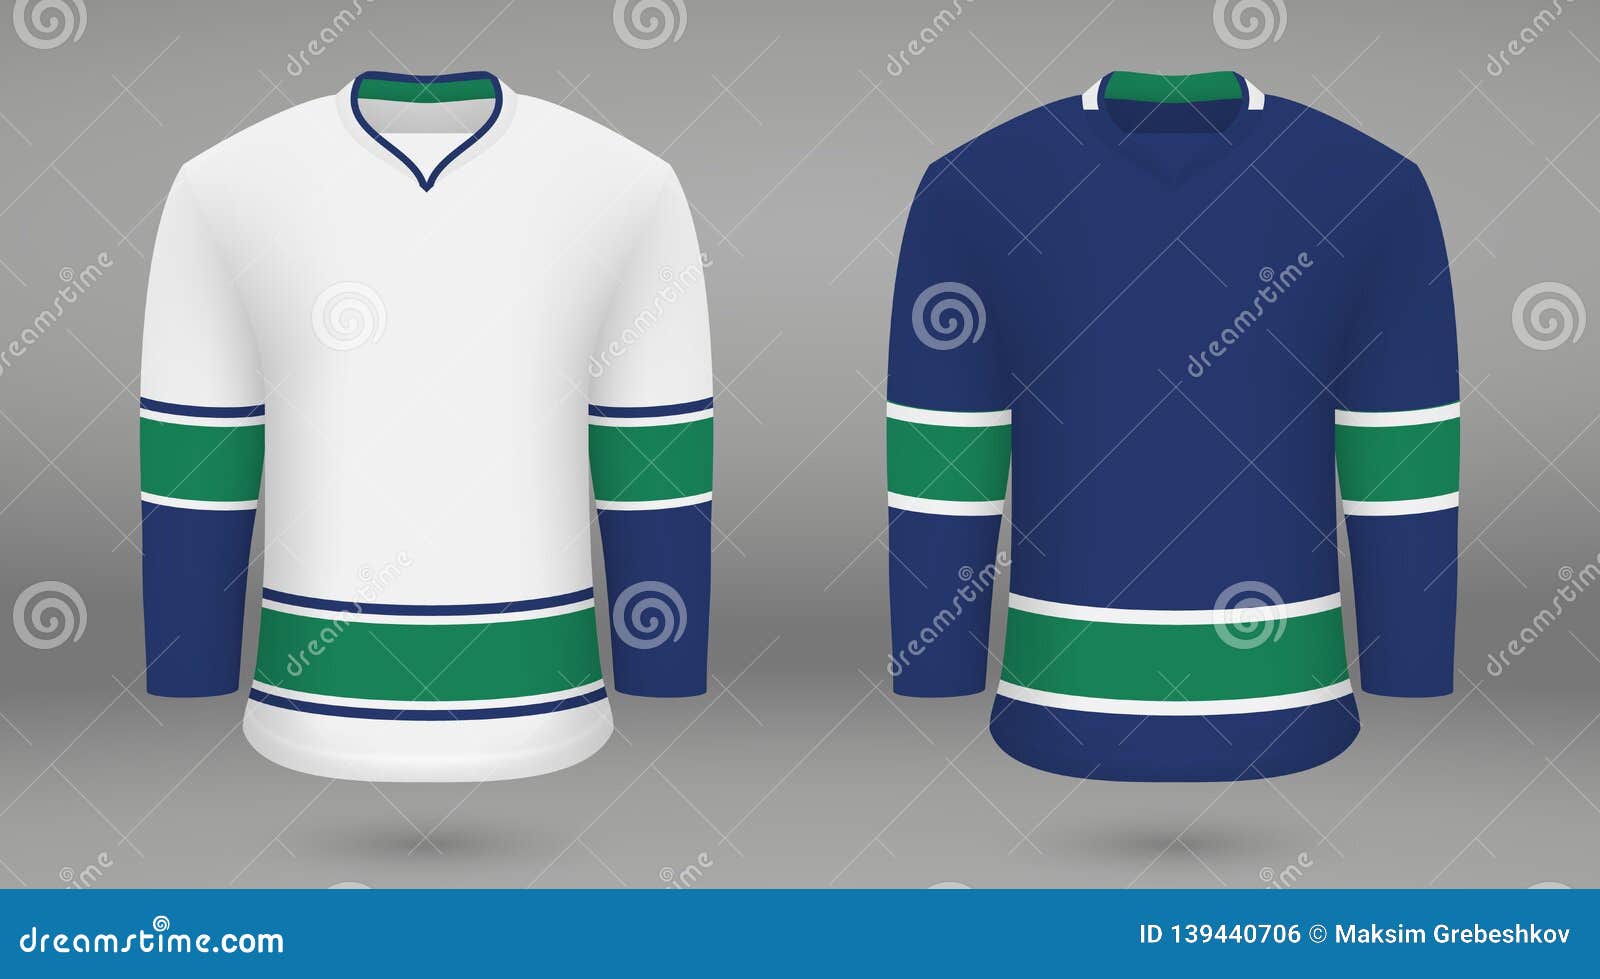 Download Shirt Template Forice Hockey Jersey Stock Illustration Illustration Of Canucks Clothes 139440706